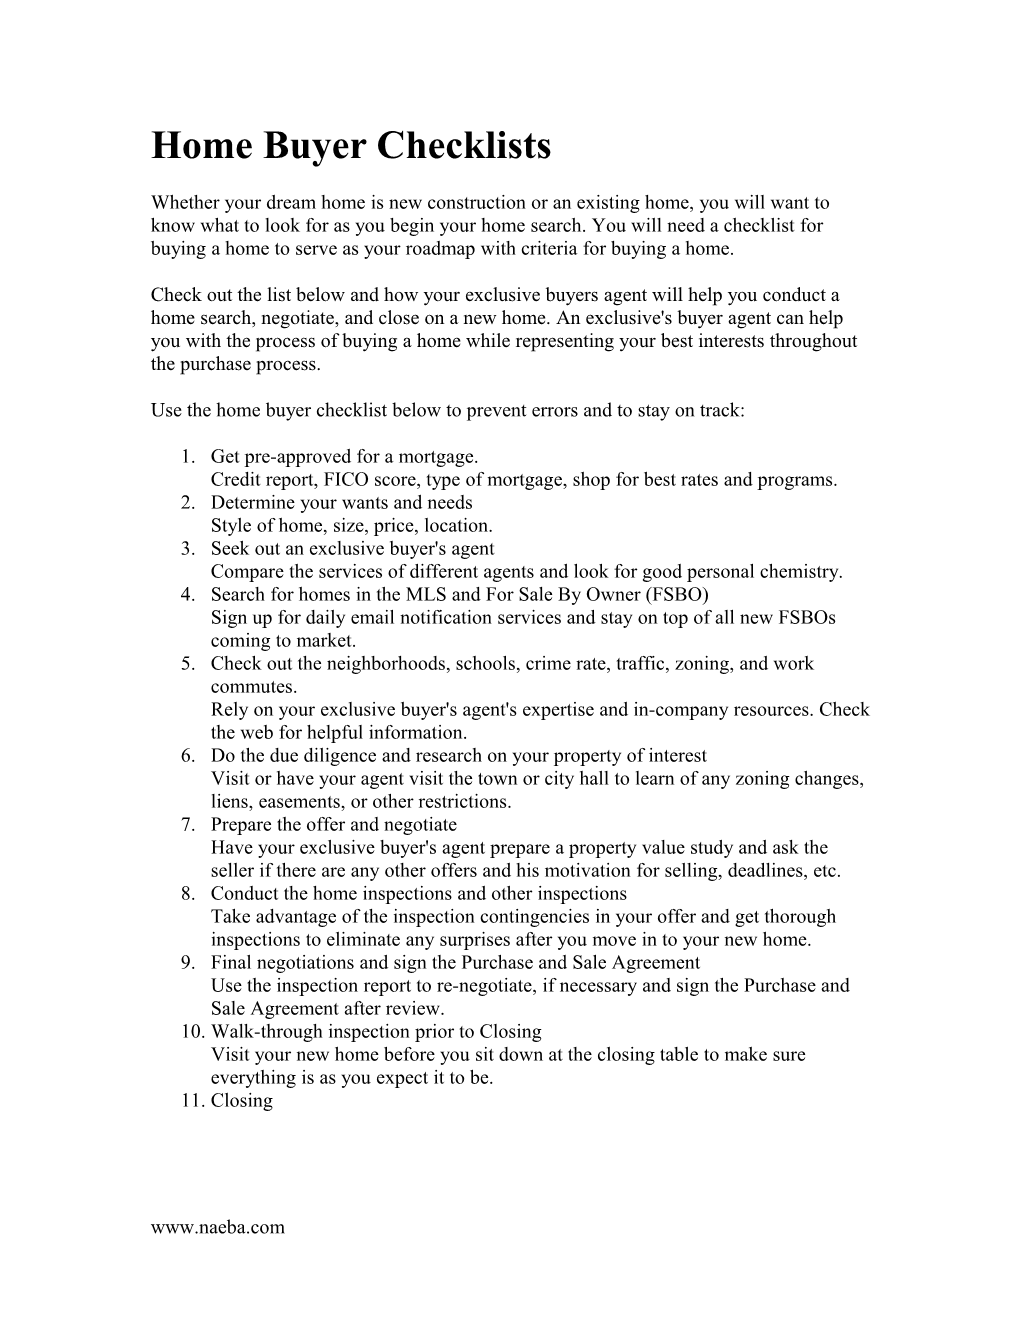 Home Buyer Checklists